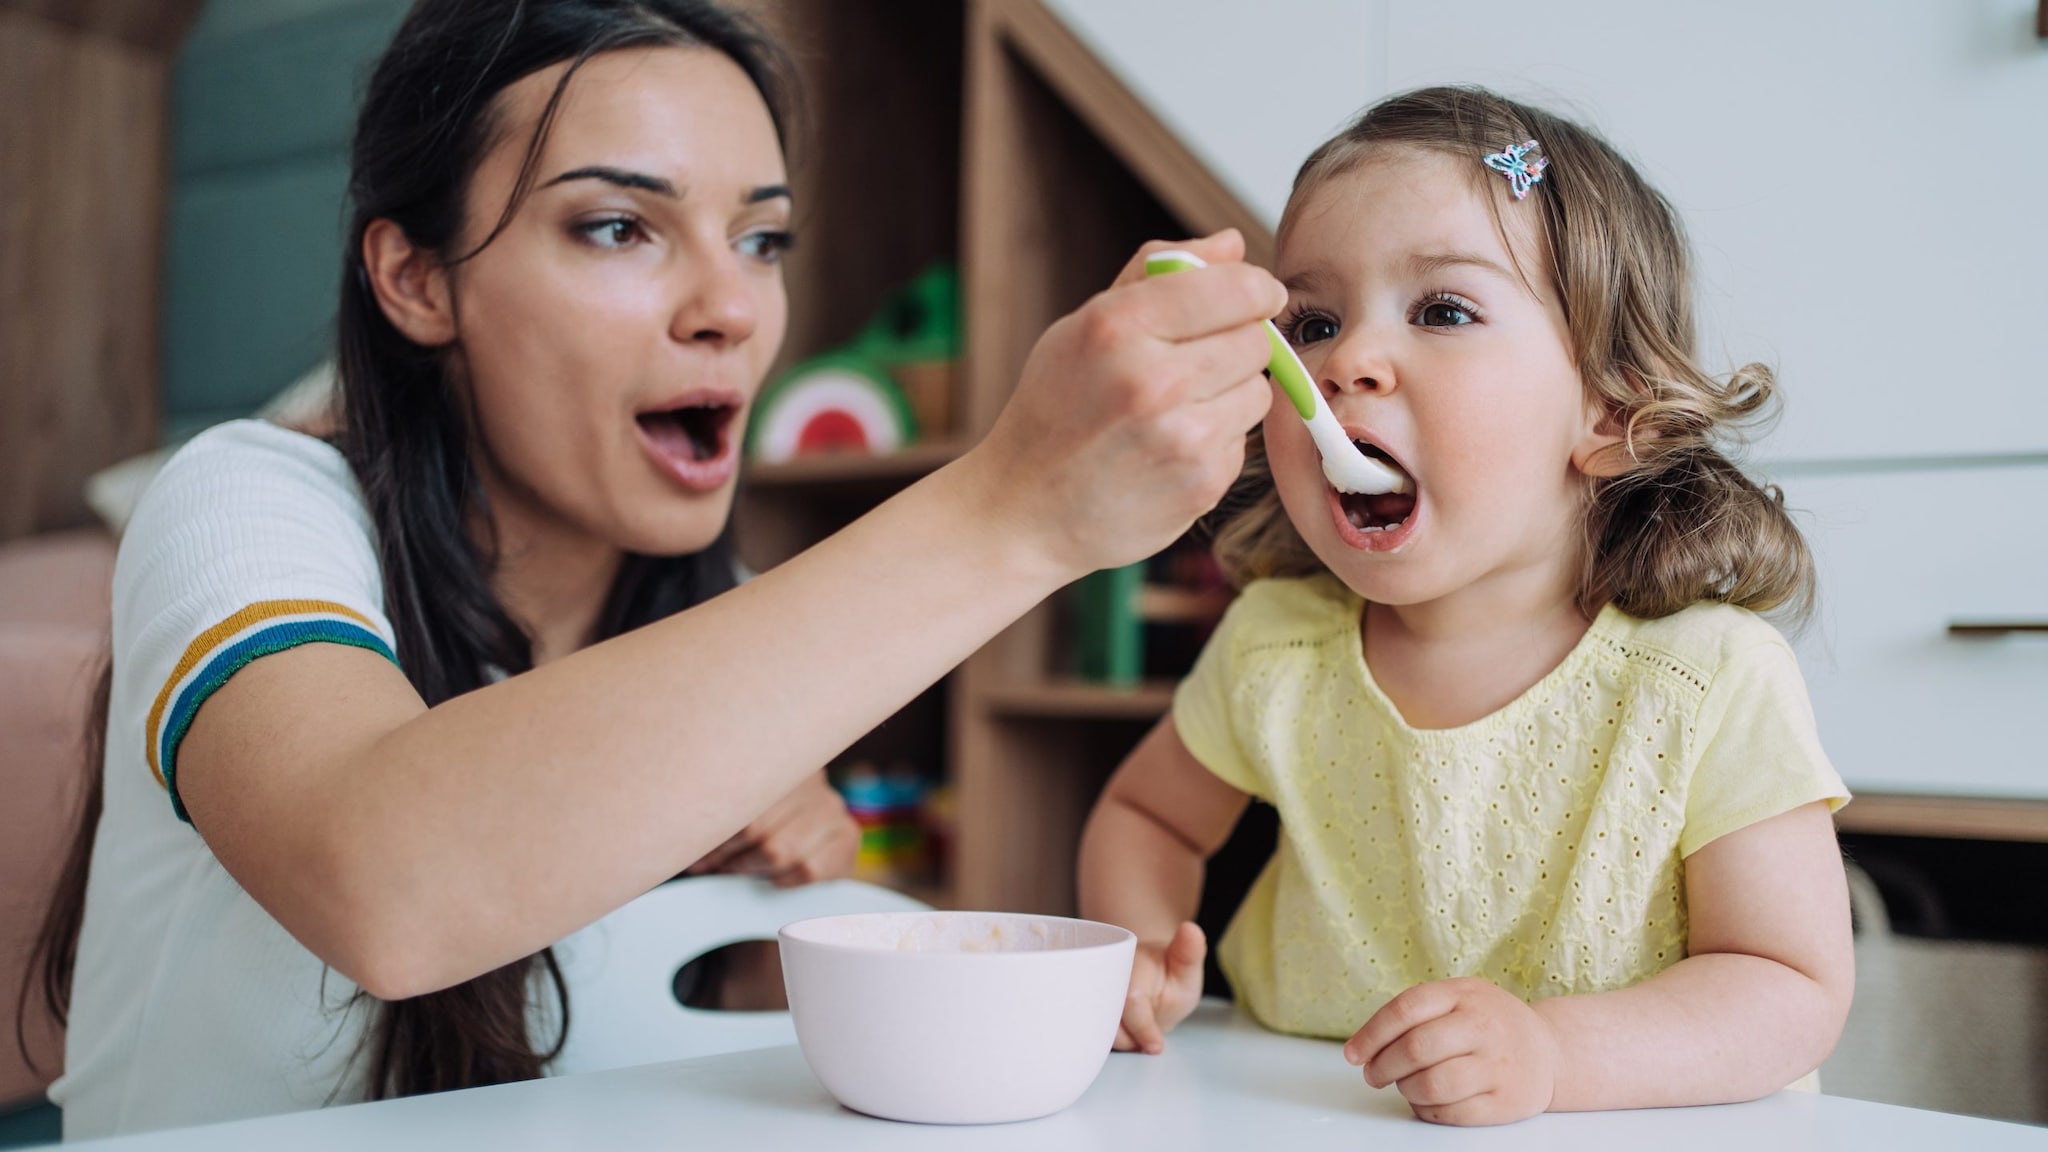 Photo of a woman feeding a young child with a spoon.